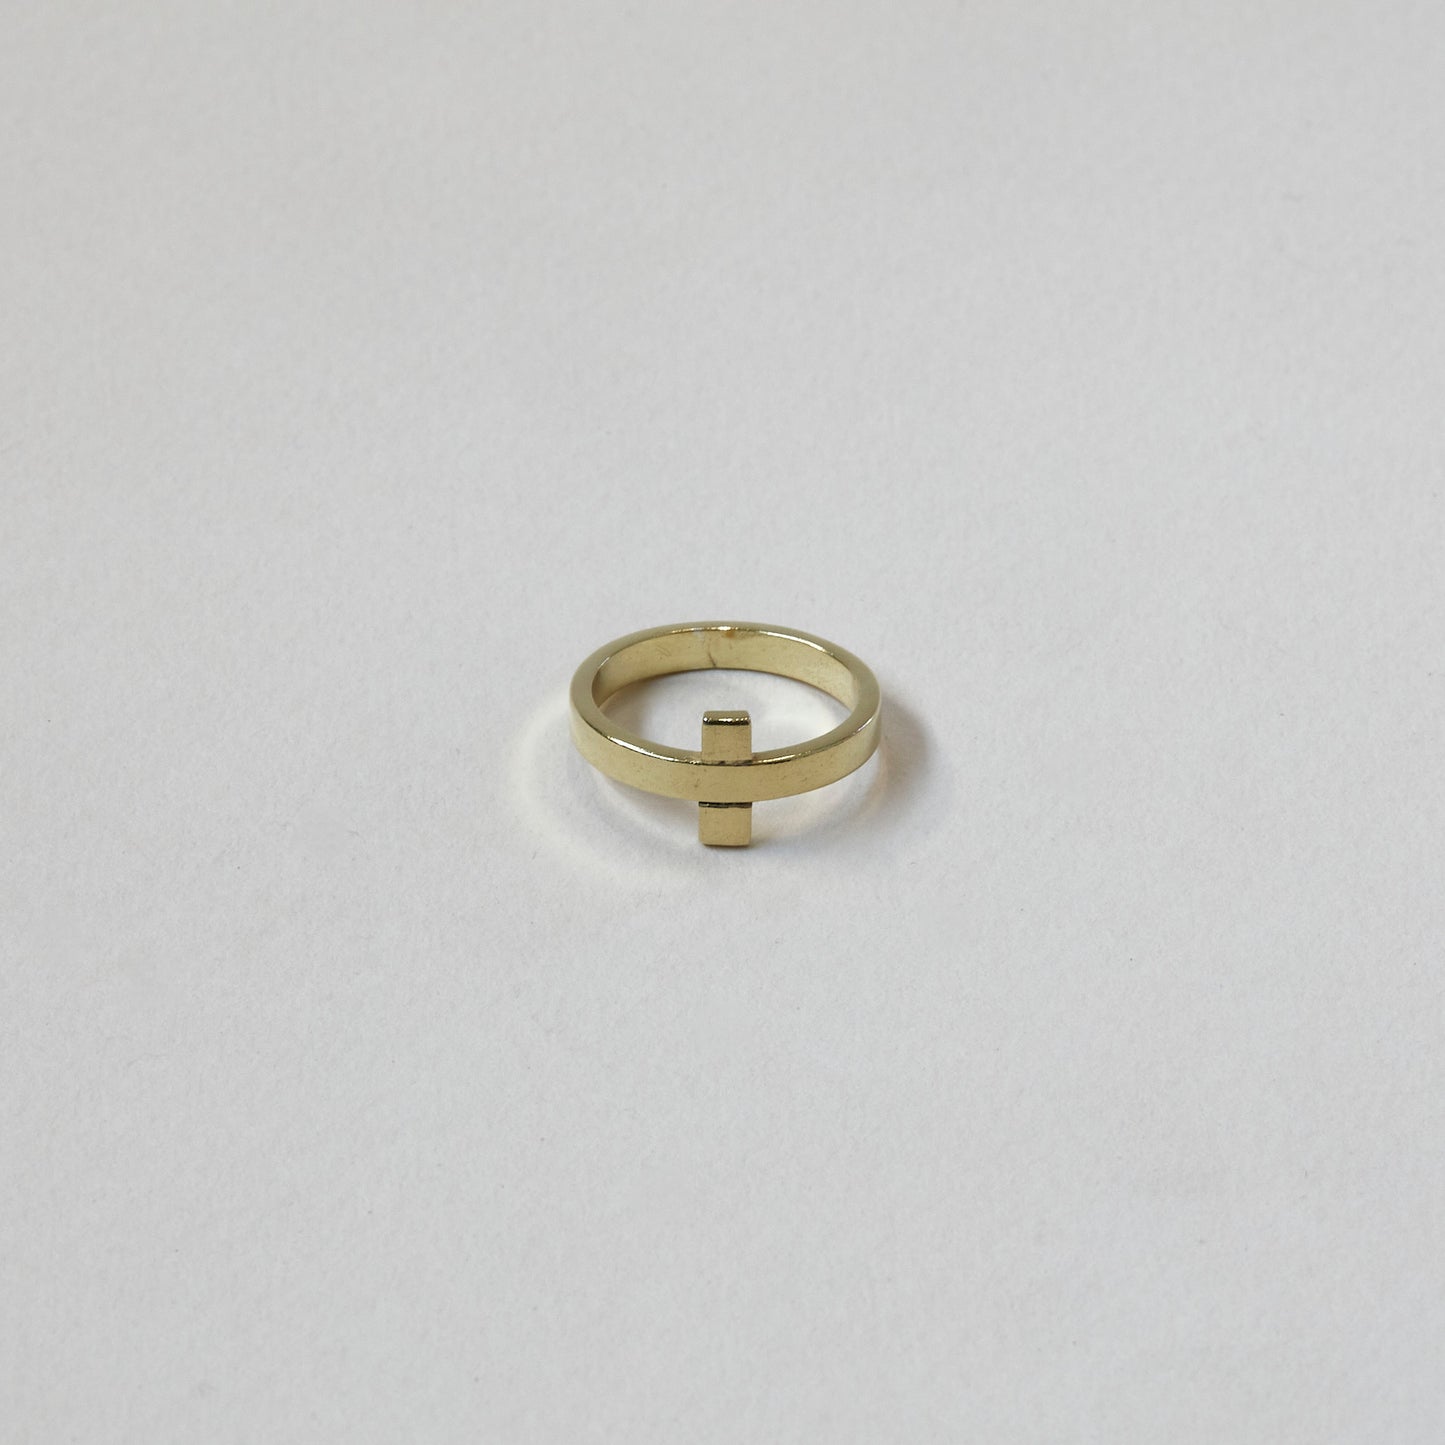 TRANQUILLITY ring 4.0